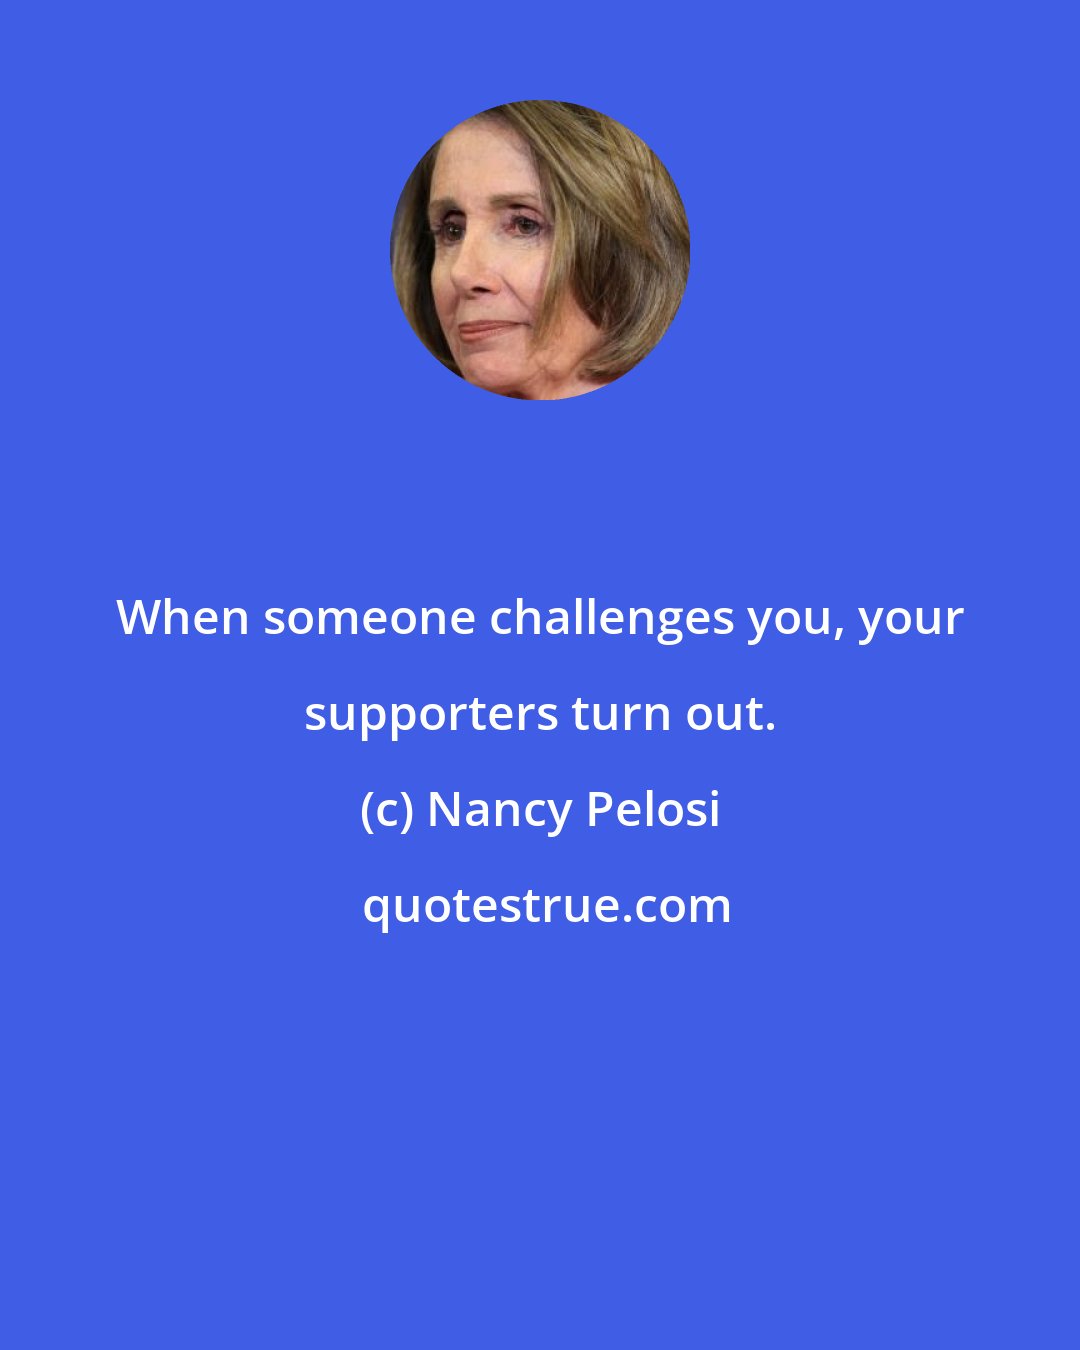 Nancy Pelosi: When someone challenges you, your supporters turn out.